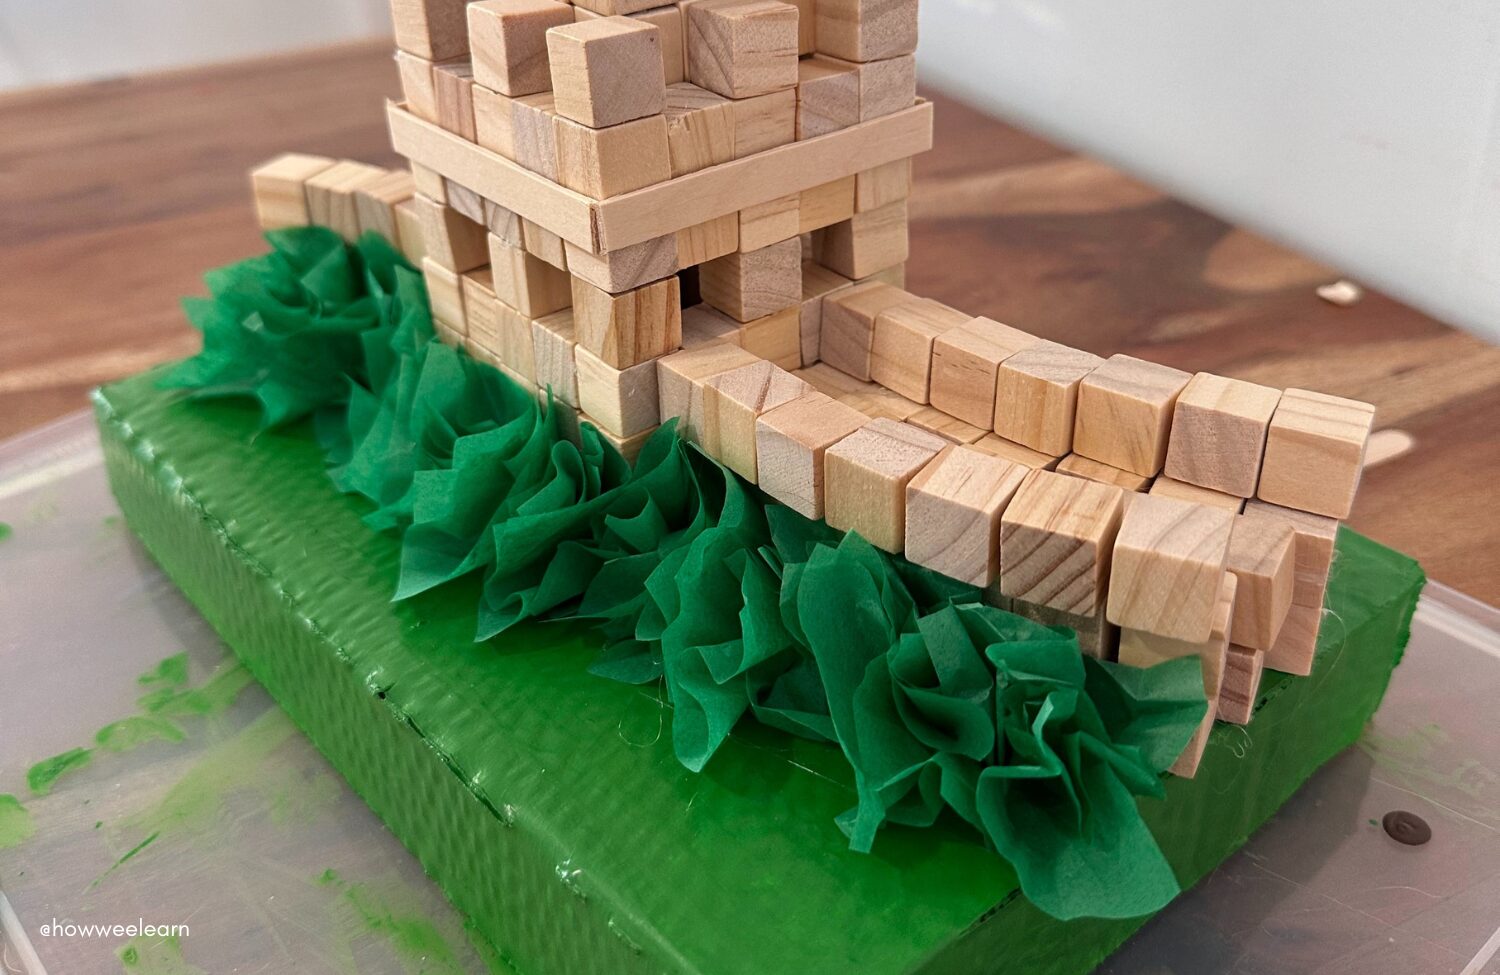 Building The Great Wall of China with small wooden blocks